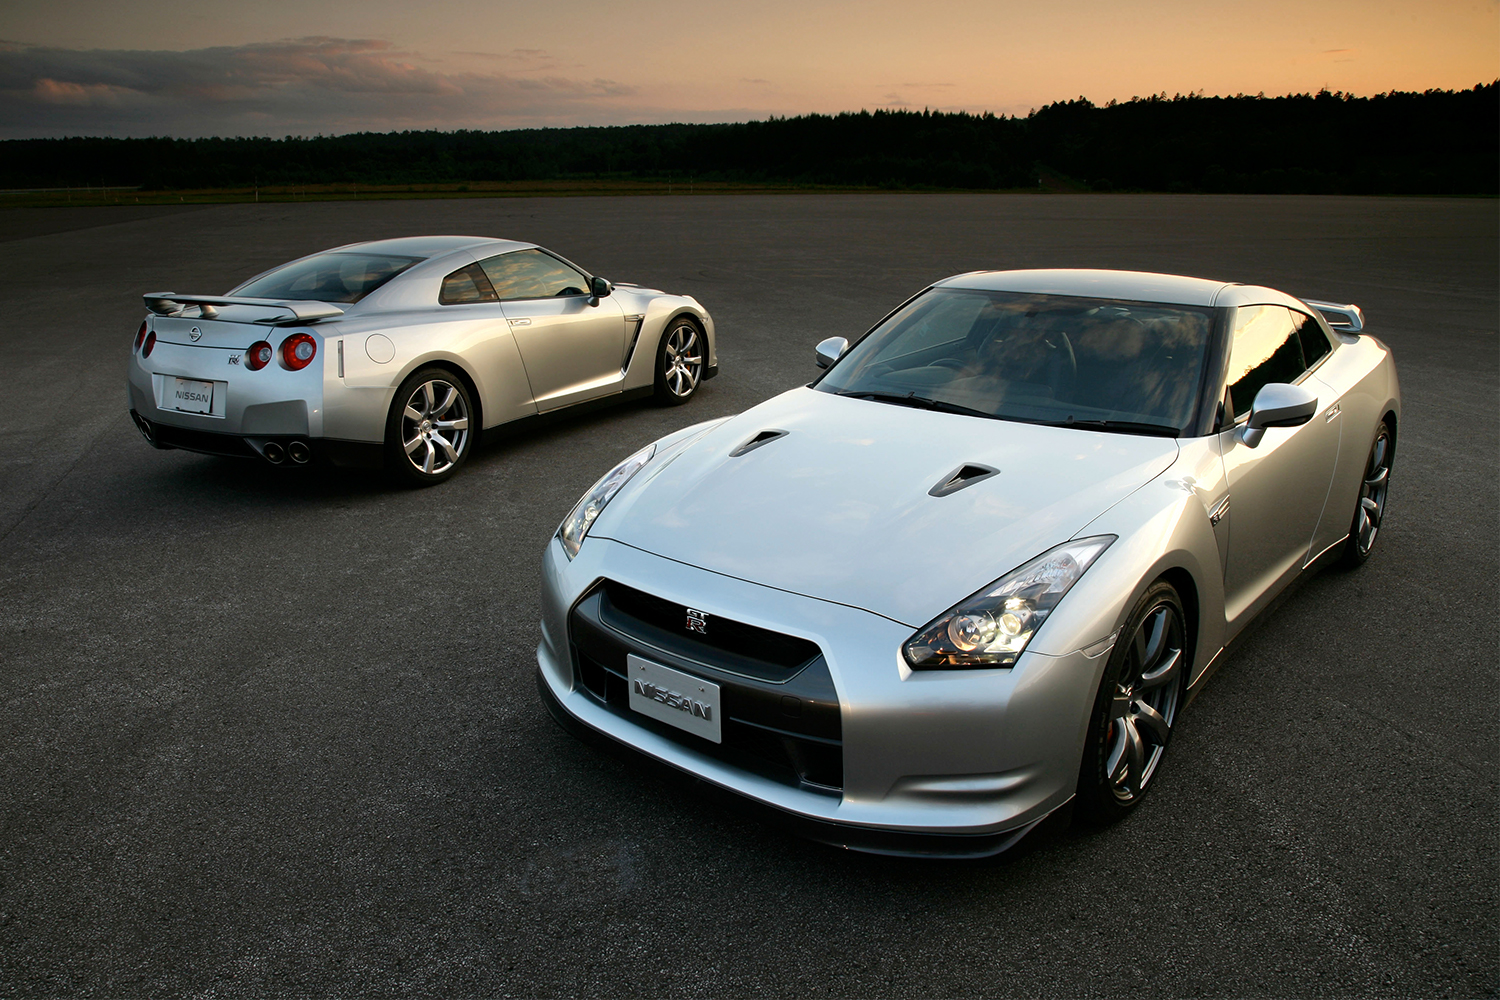 Buying Guide: The Nissan GT-R R35 Is an Overlooked Supercar Fighter -  InsideHook